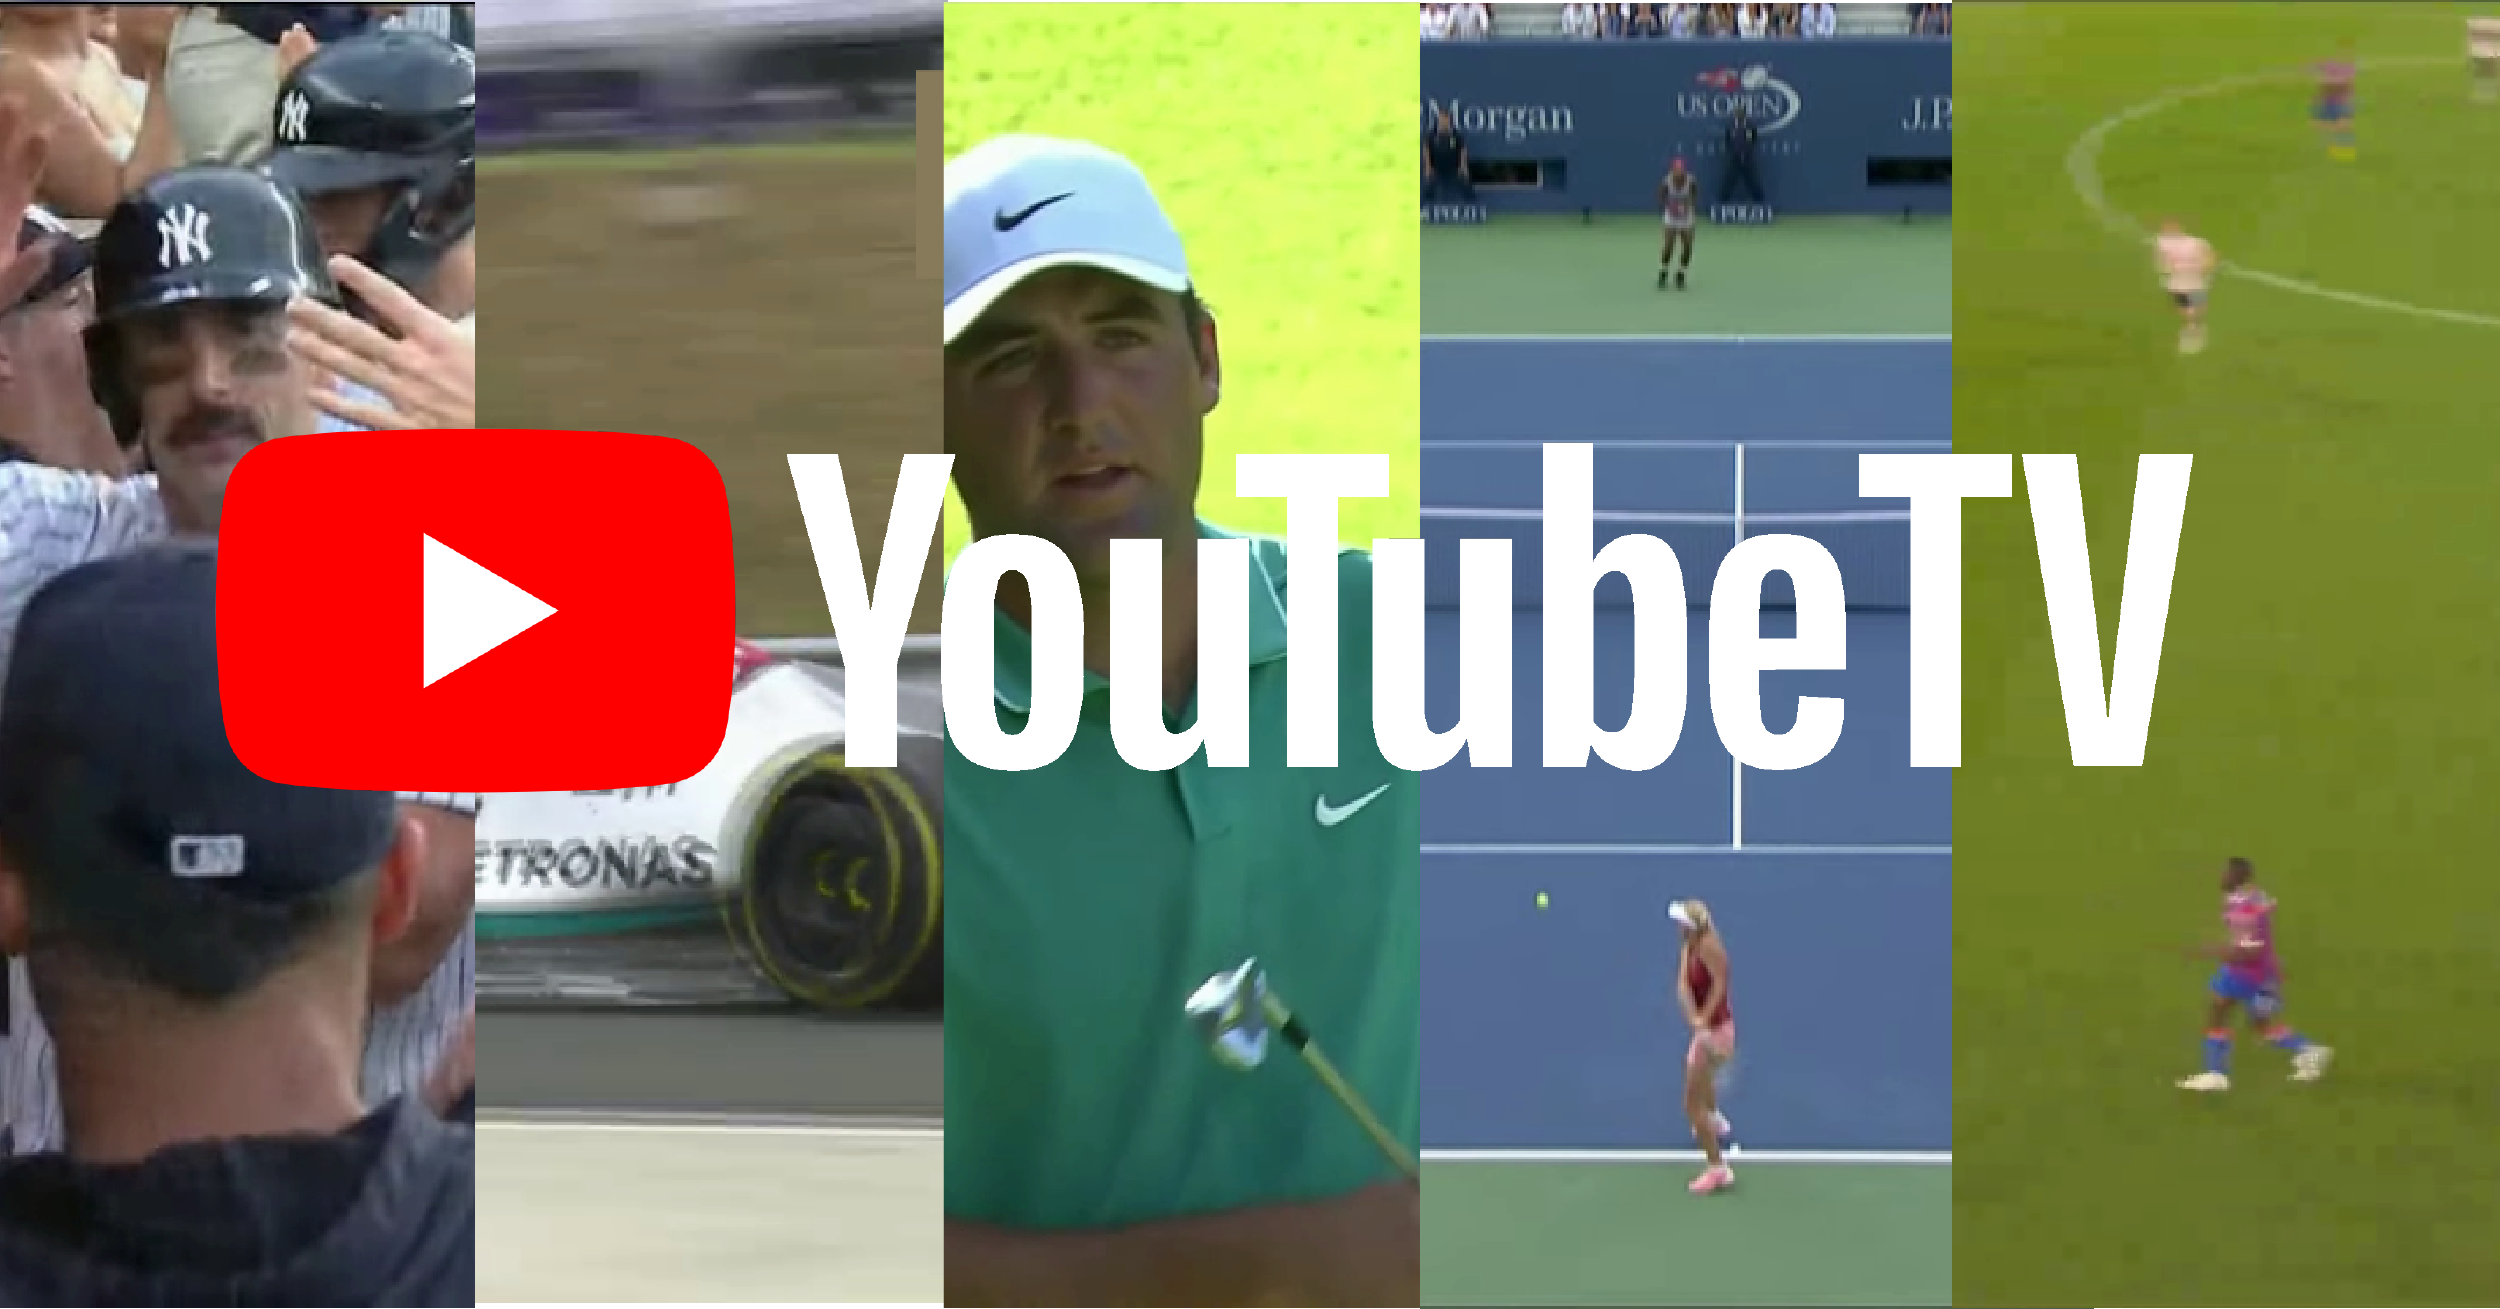 Where does YouTube TV rank for live sports video quality? Part 1